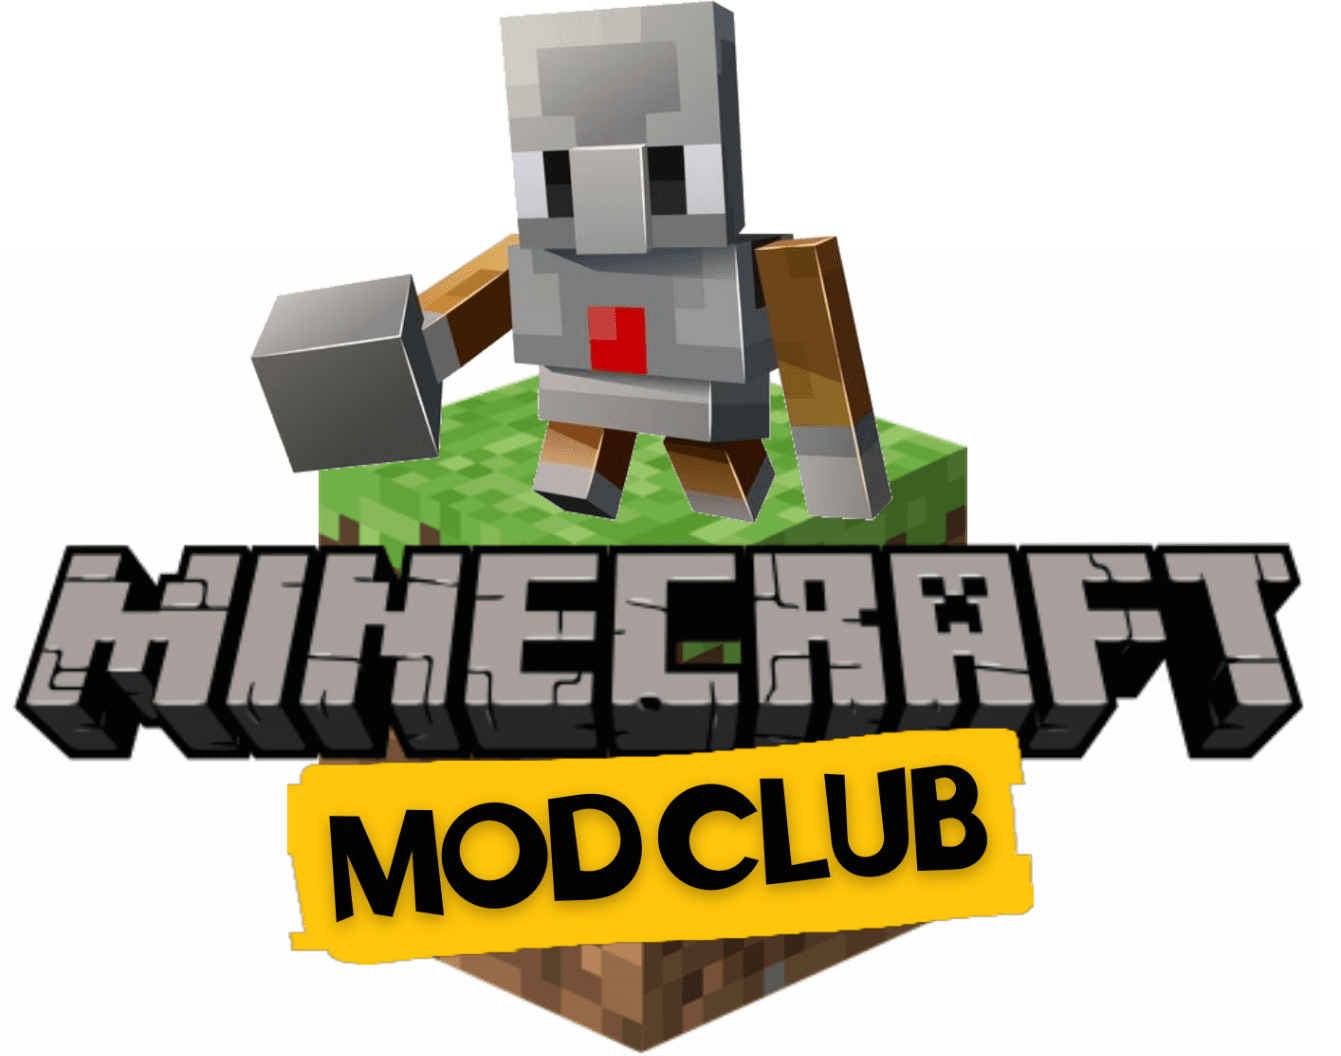 Learn to code in Minecraft with the Minecraft mod club for children aged 6-16